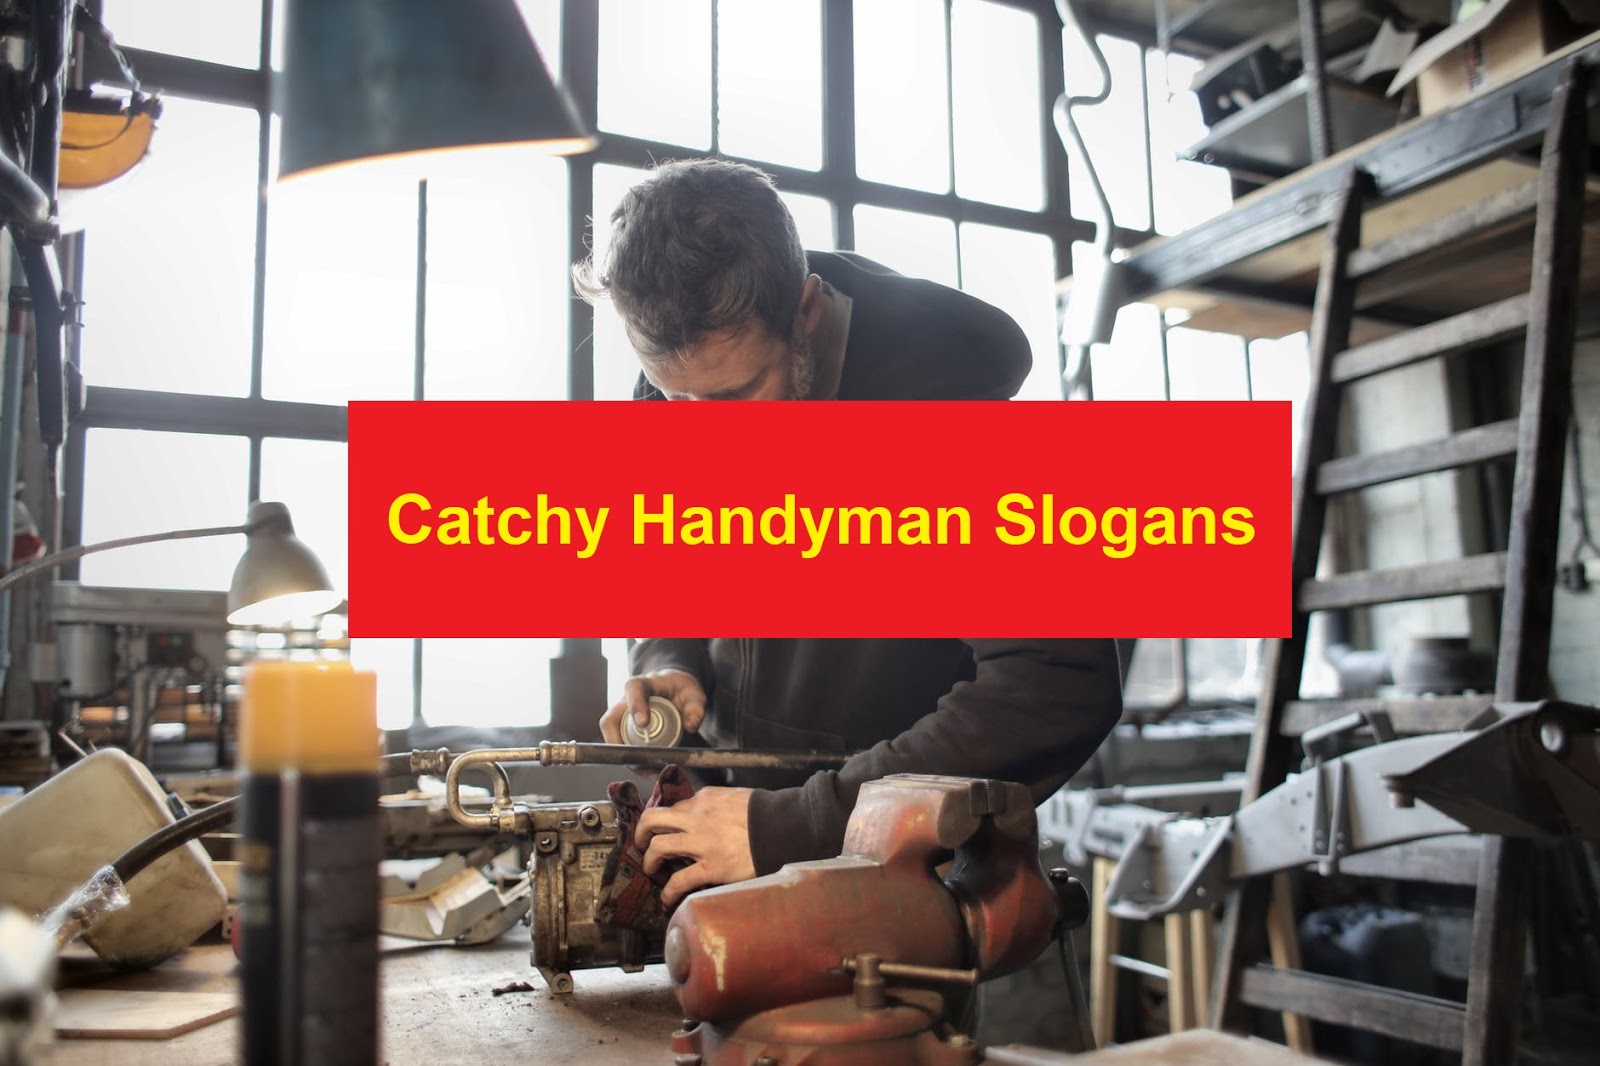 200+ Catchy Handyman Slogans and Taglines